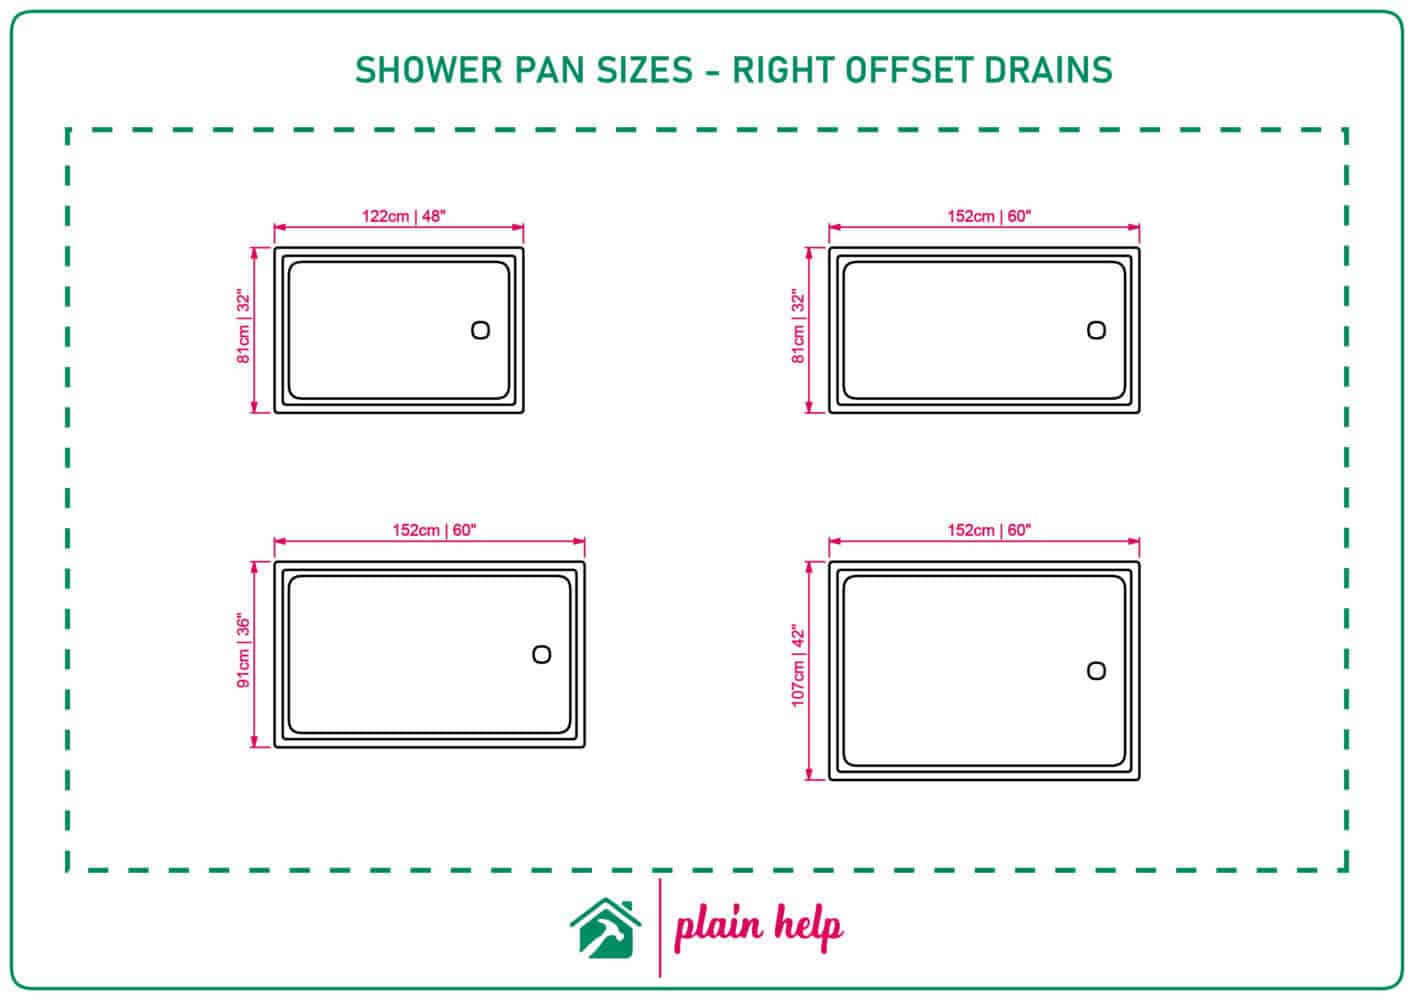 SHower pan sizes for right offset drains